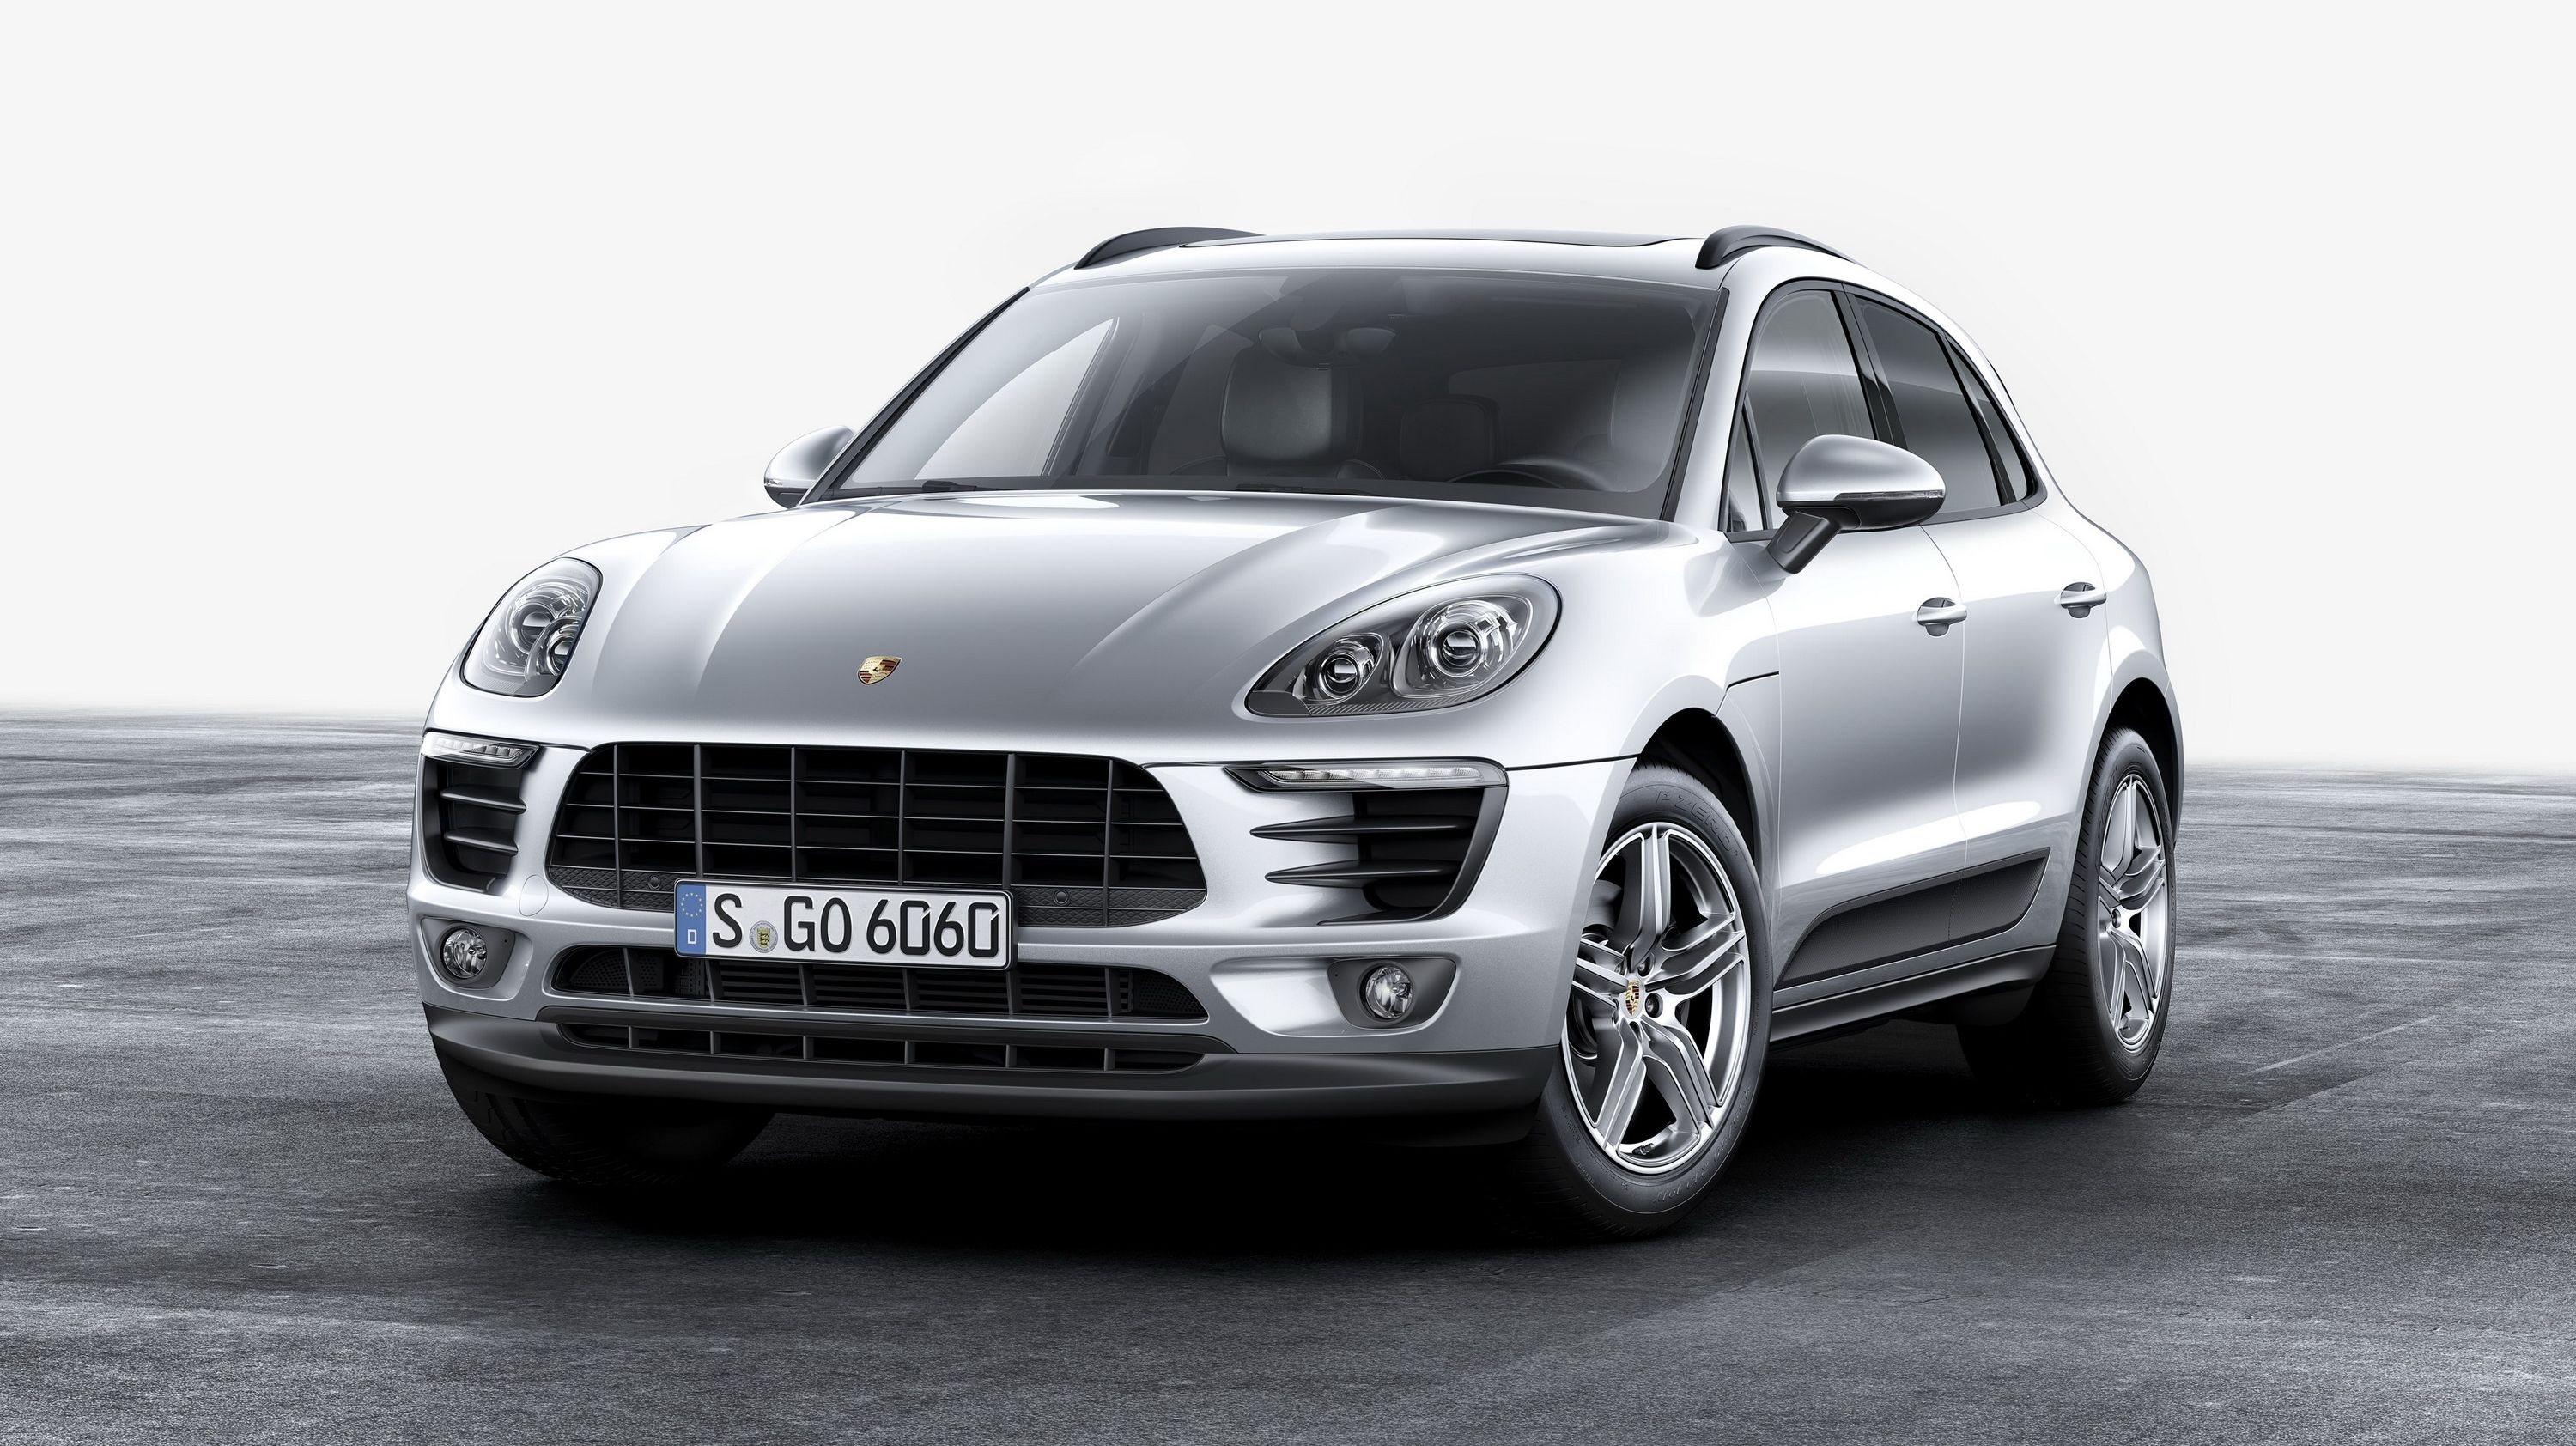 Porsche Macan: Latest News, Reviews, Specifications, Prices, Photo And Videos